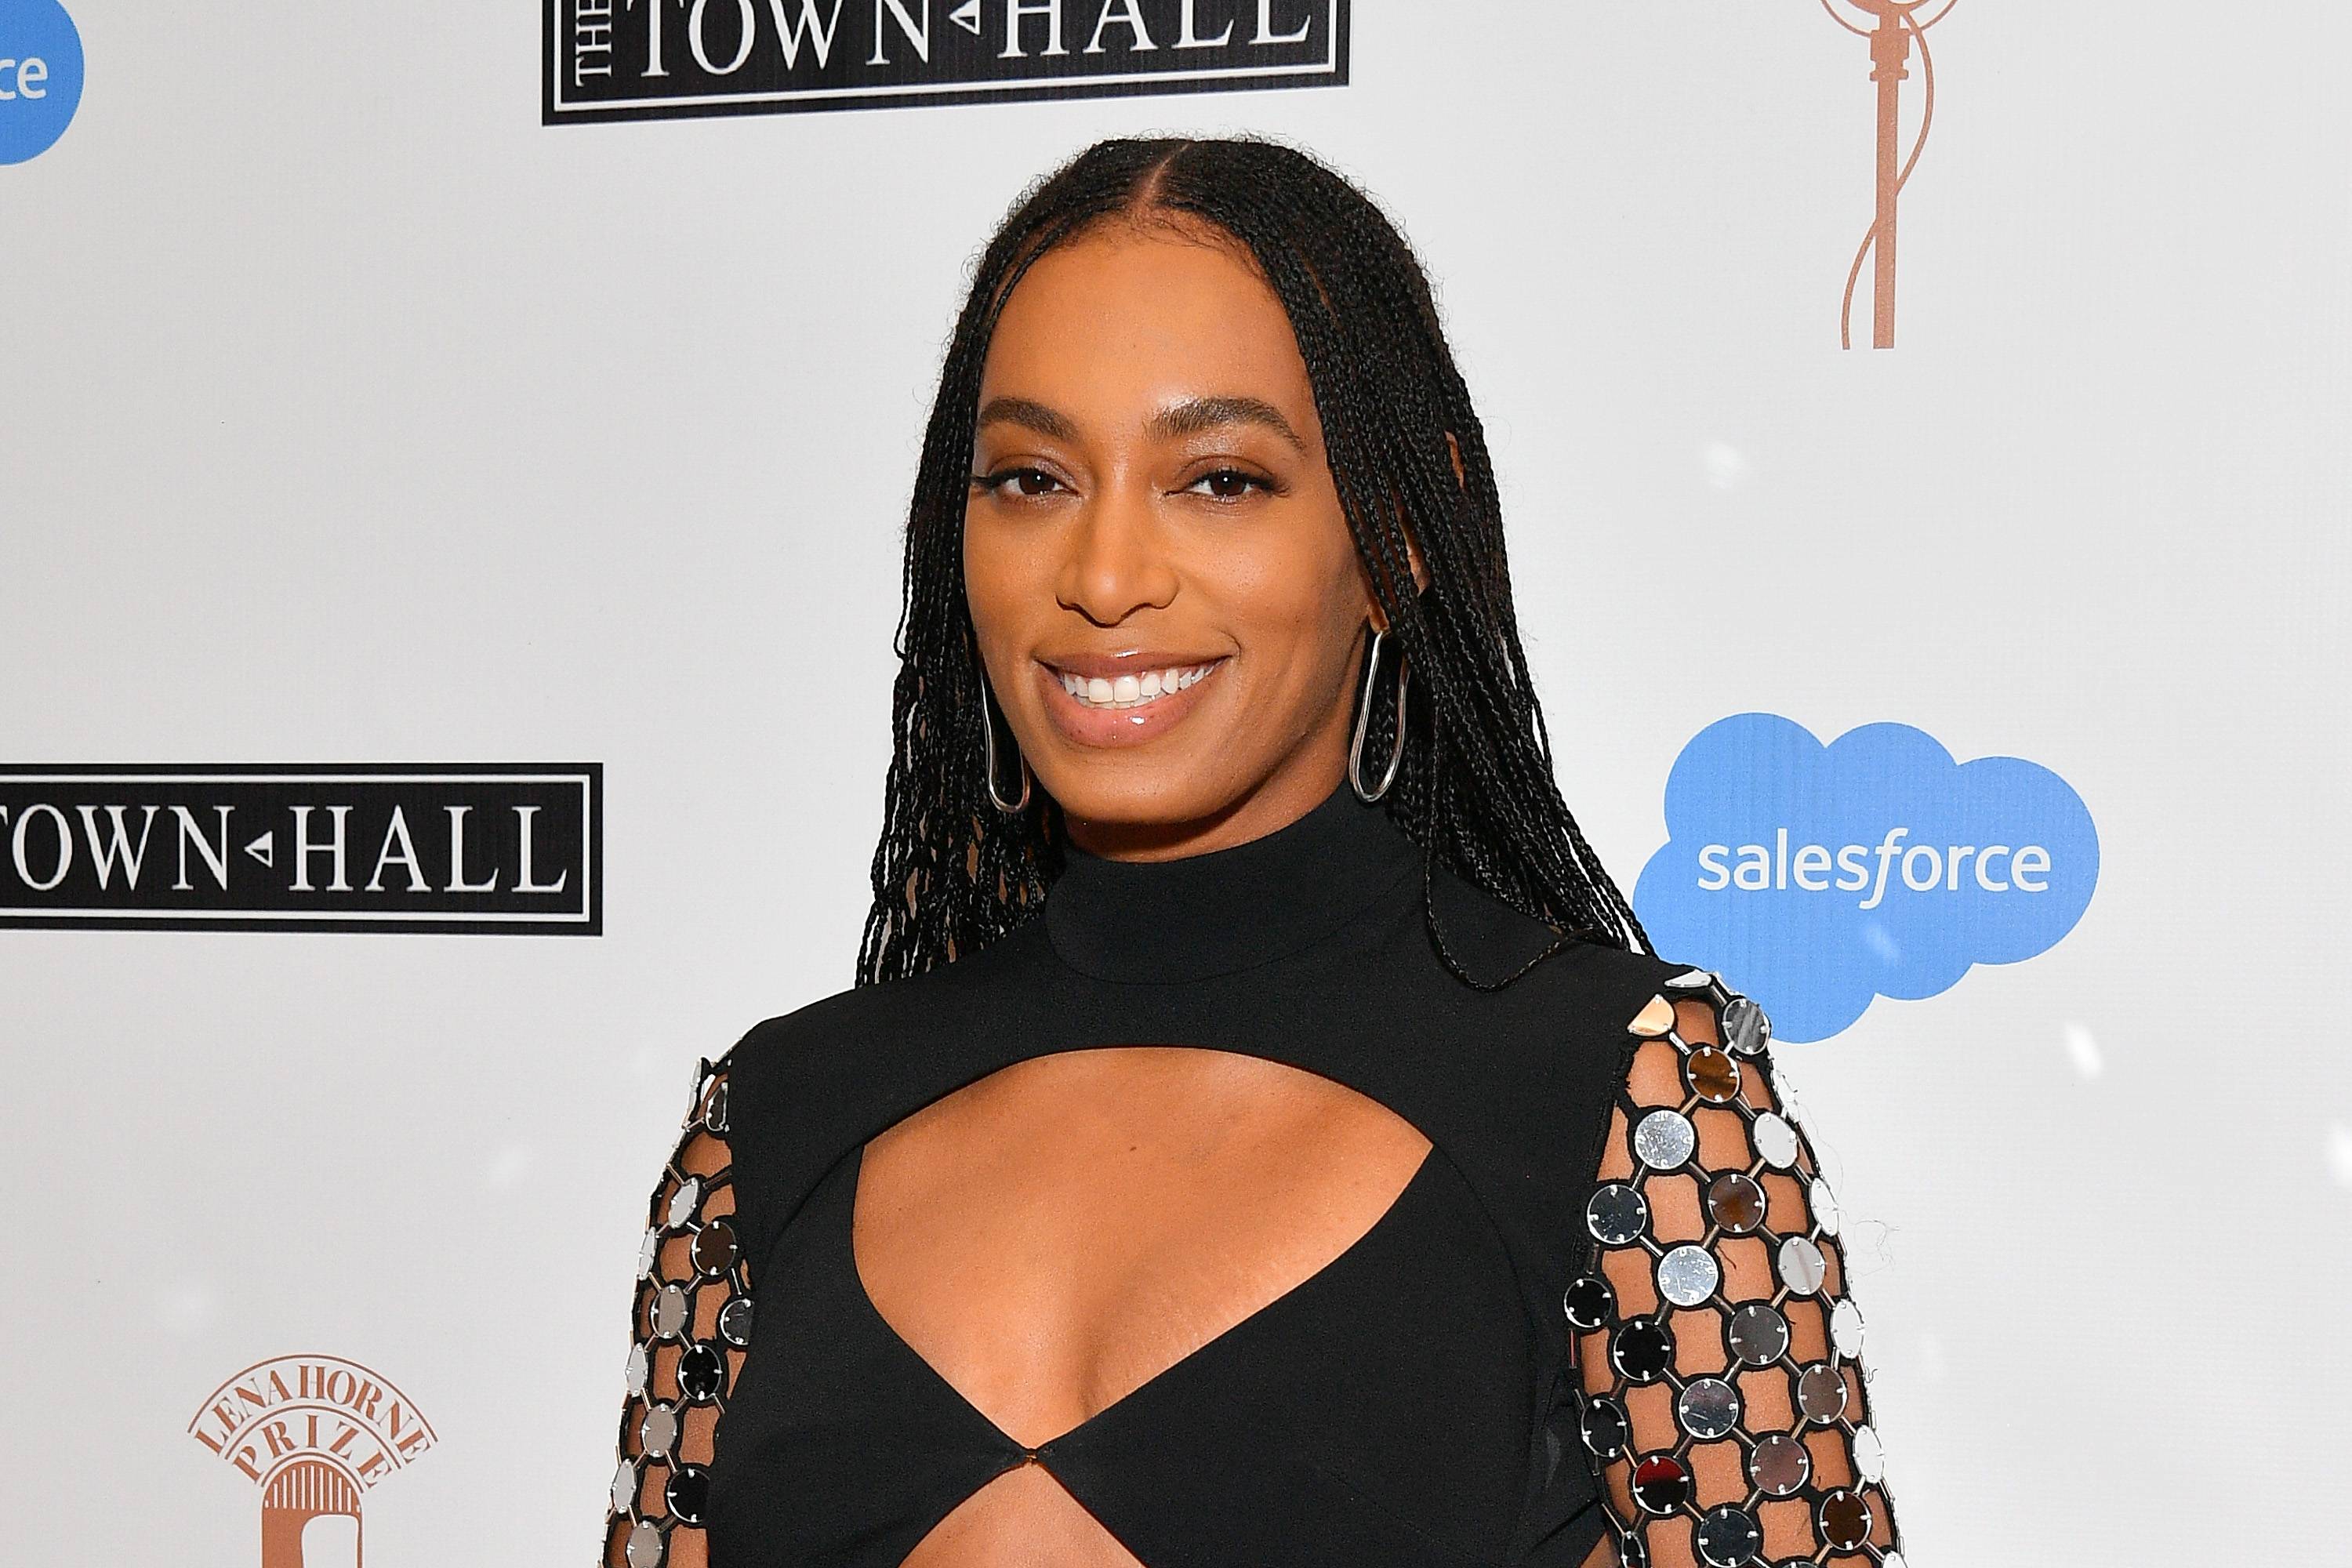 NEW YORK, NEW YORK - FEBRUARY 28: Honoree Solange Knowles attends The Lena Horne Prize for Artists Creating Social Impact inaugural celebration at The Town Hall on February 28, 2020 in New York City. (Photo by Dia Dipasupil/WireImage)